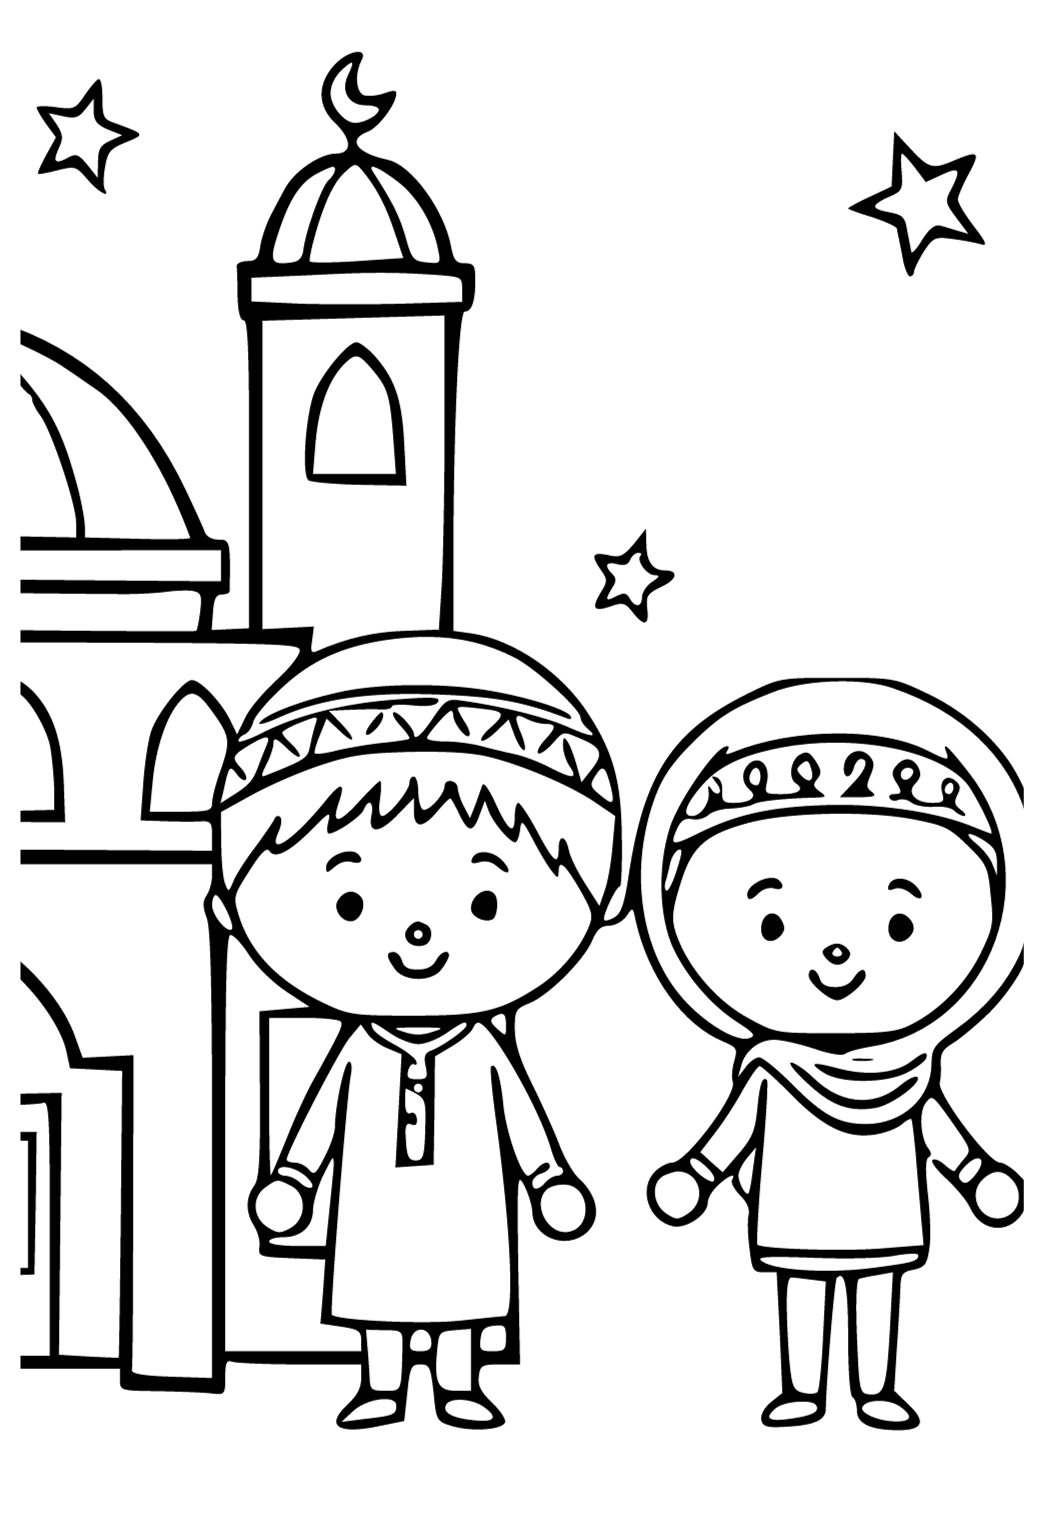 Free printable ramadan pair coloring page for adults and kids